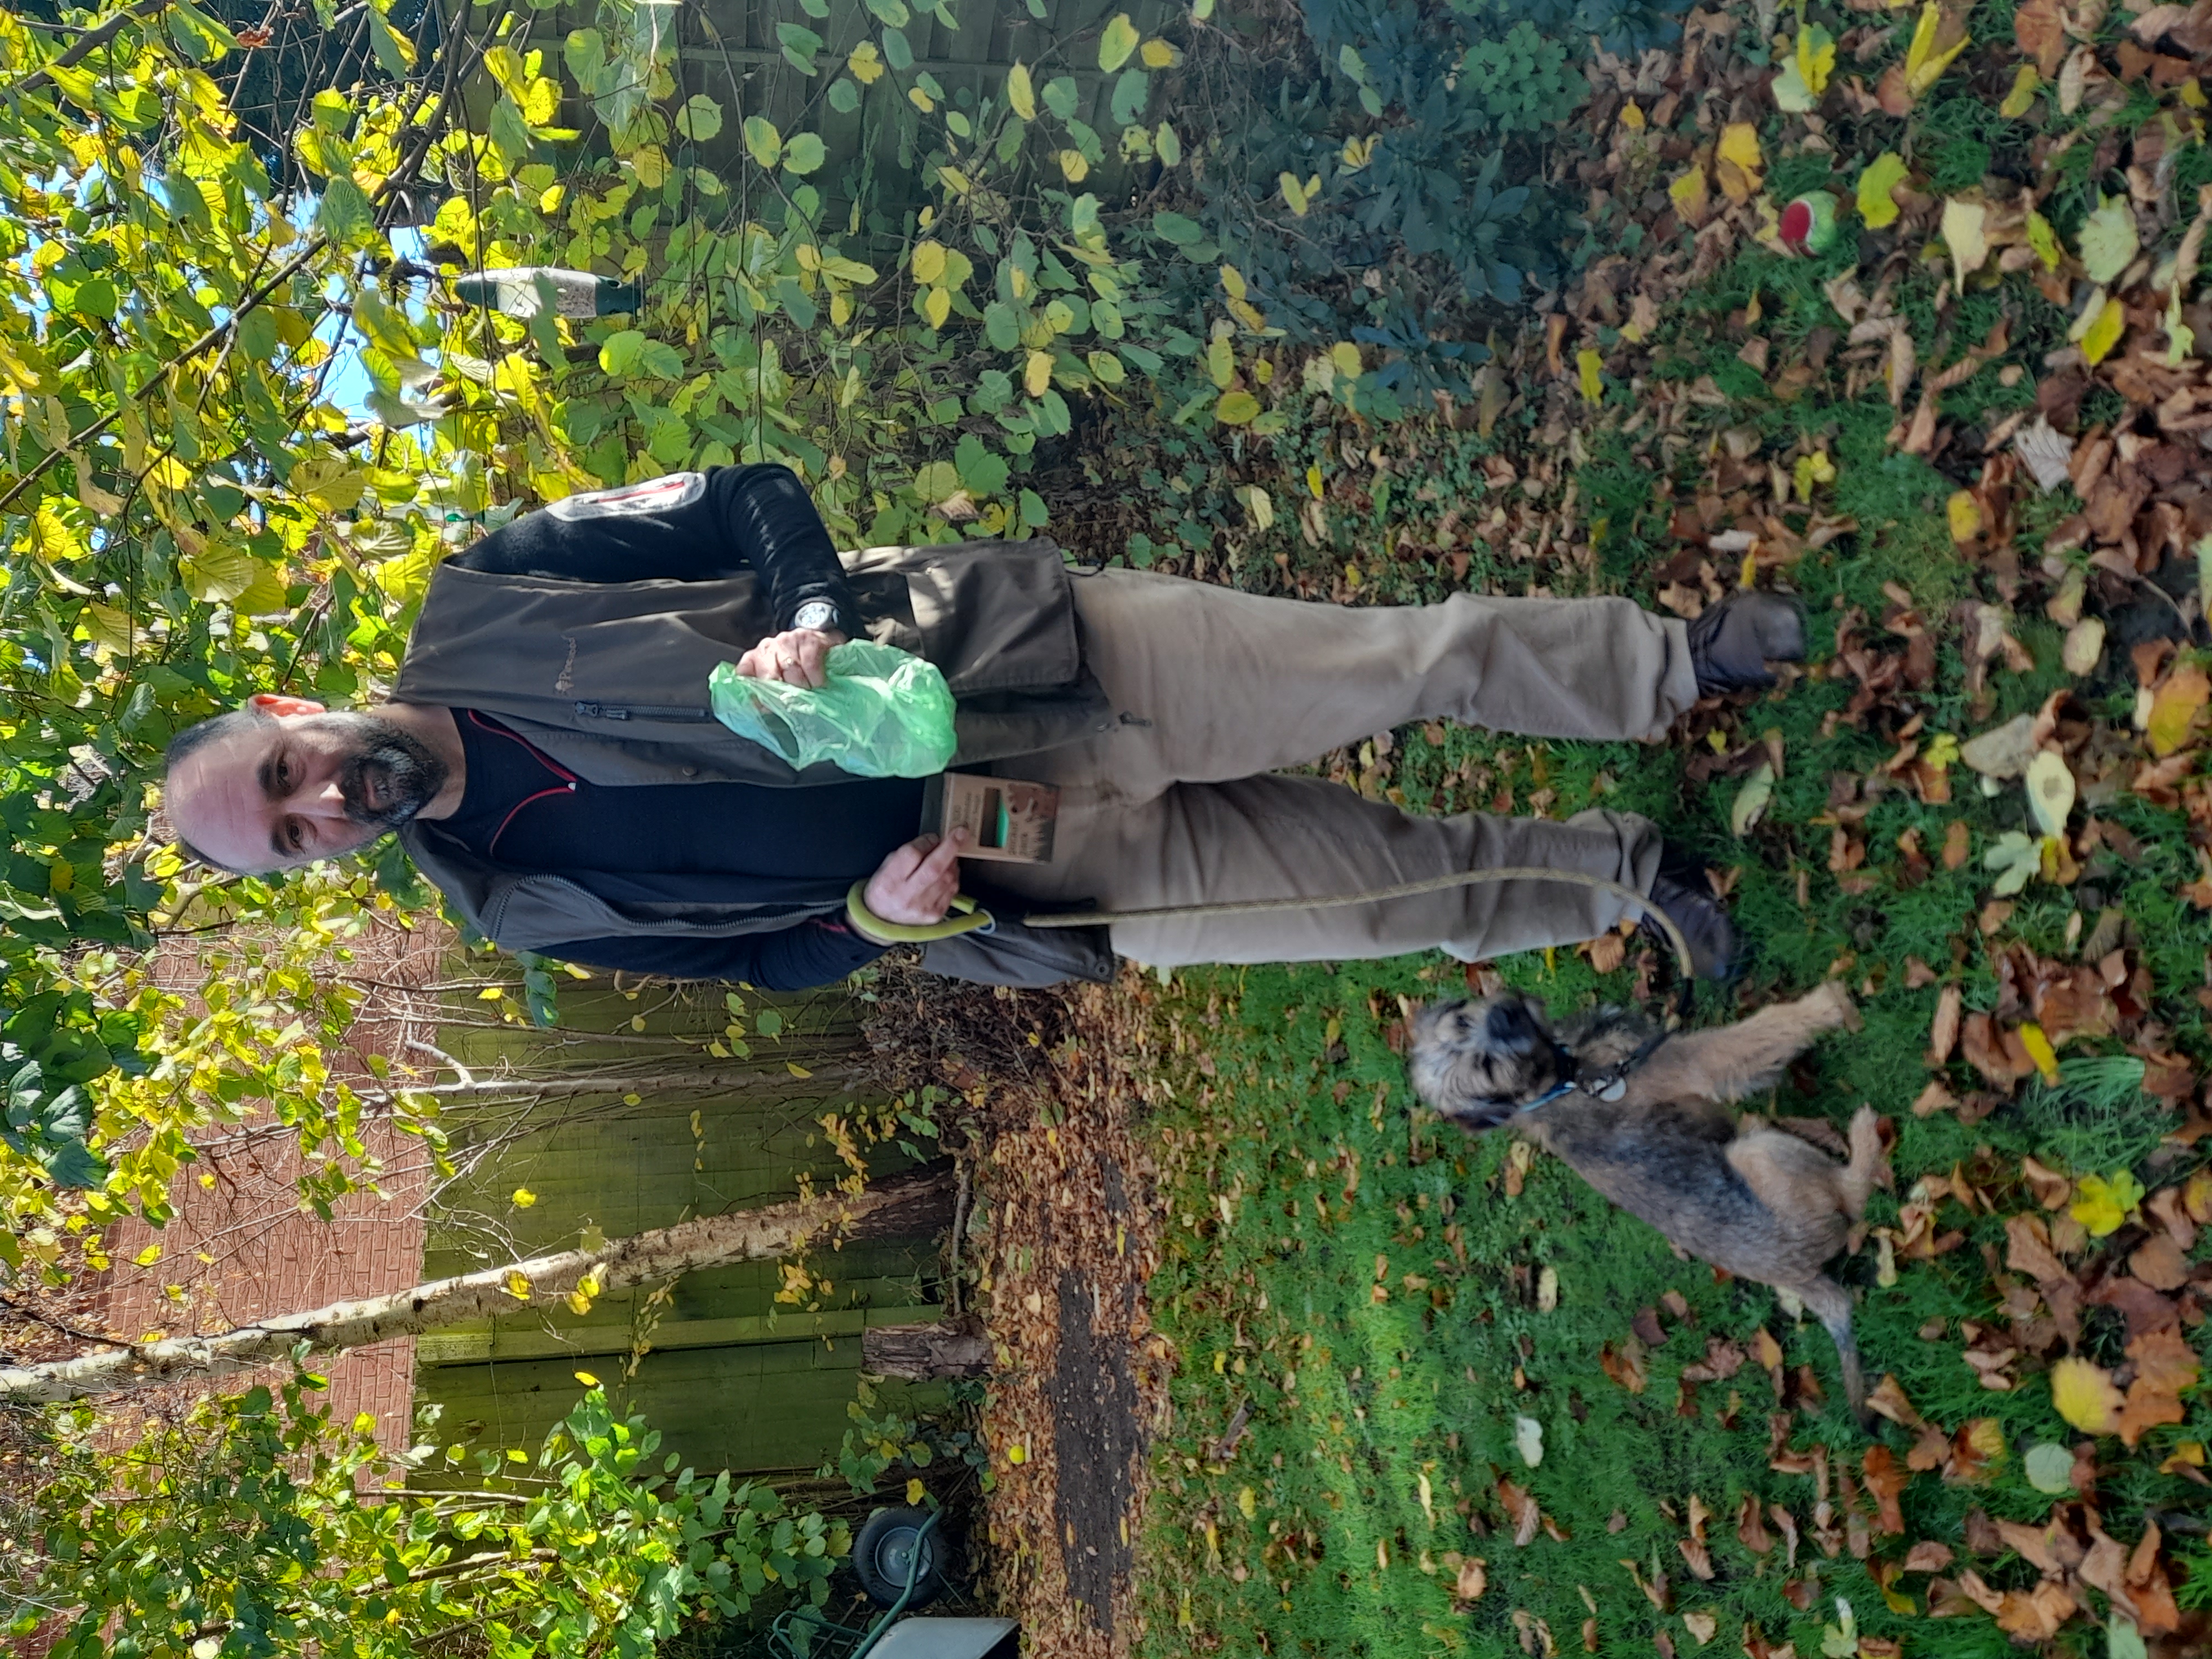 Ed standing in a grassy garden full of fallen autumnal leaves holding a green sustainable poo bag in one had and his dog’s lead in the other. His puppy sits to his left.